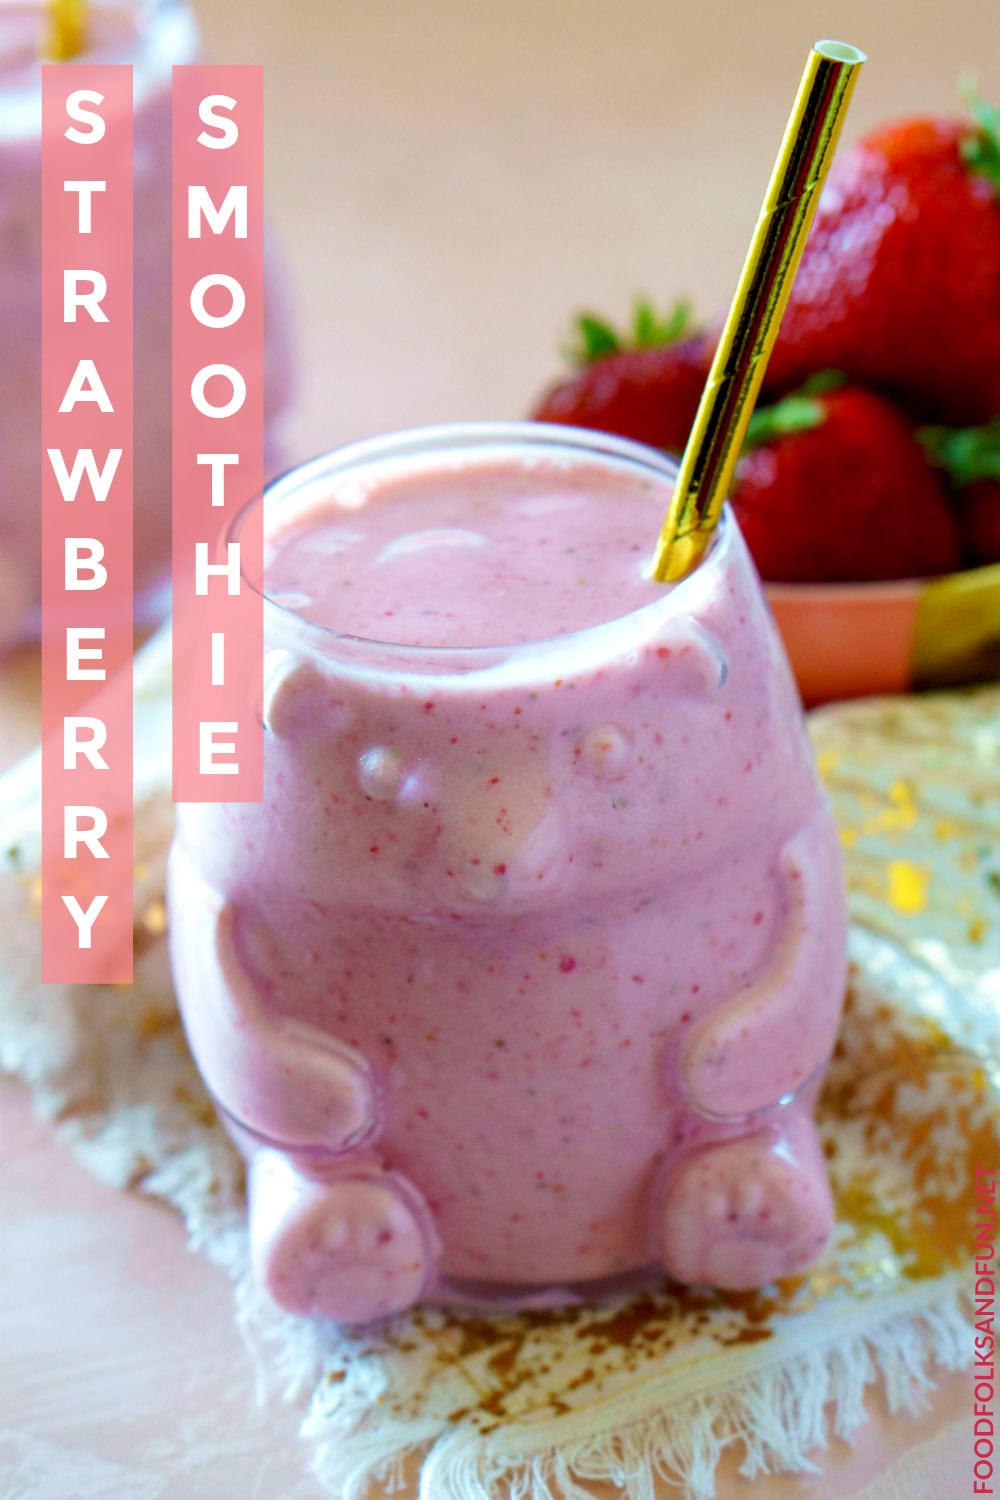 Quick and easy Strawberry Smoothie recipe for an on-the-go breakfast.